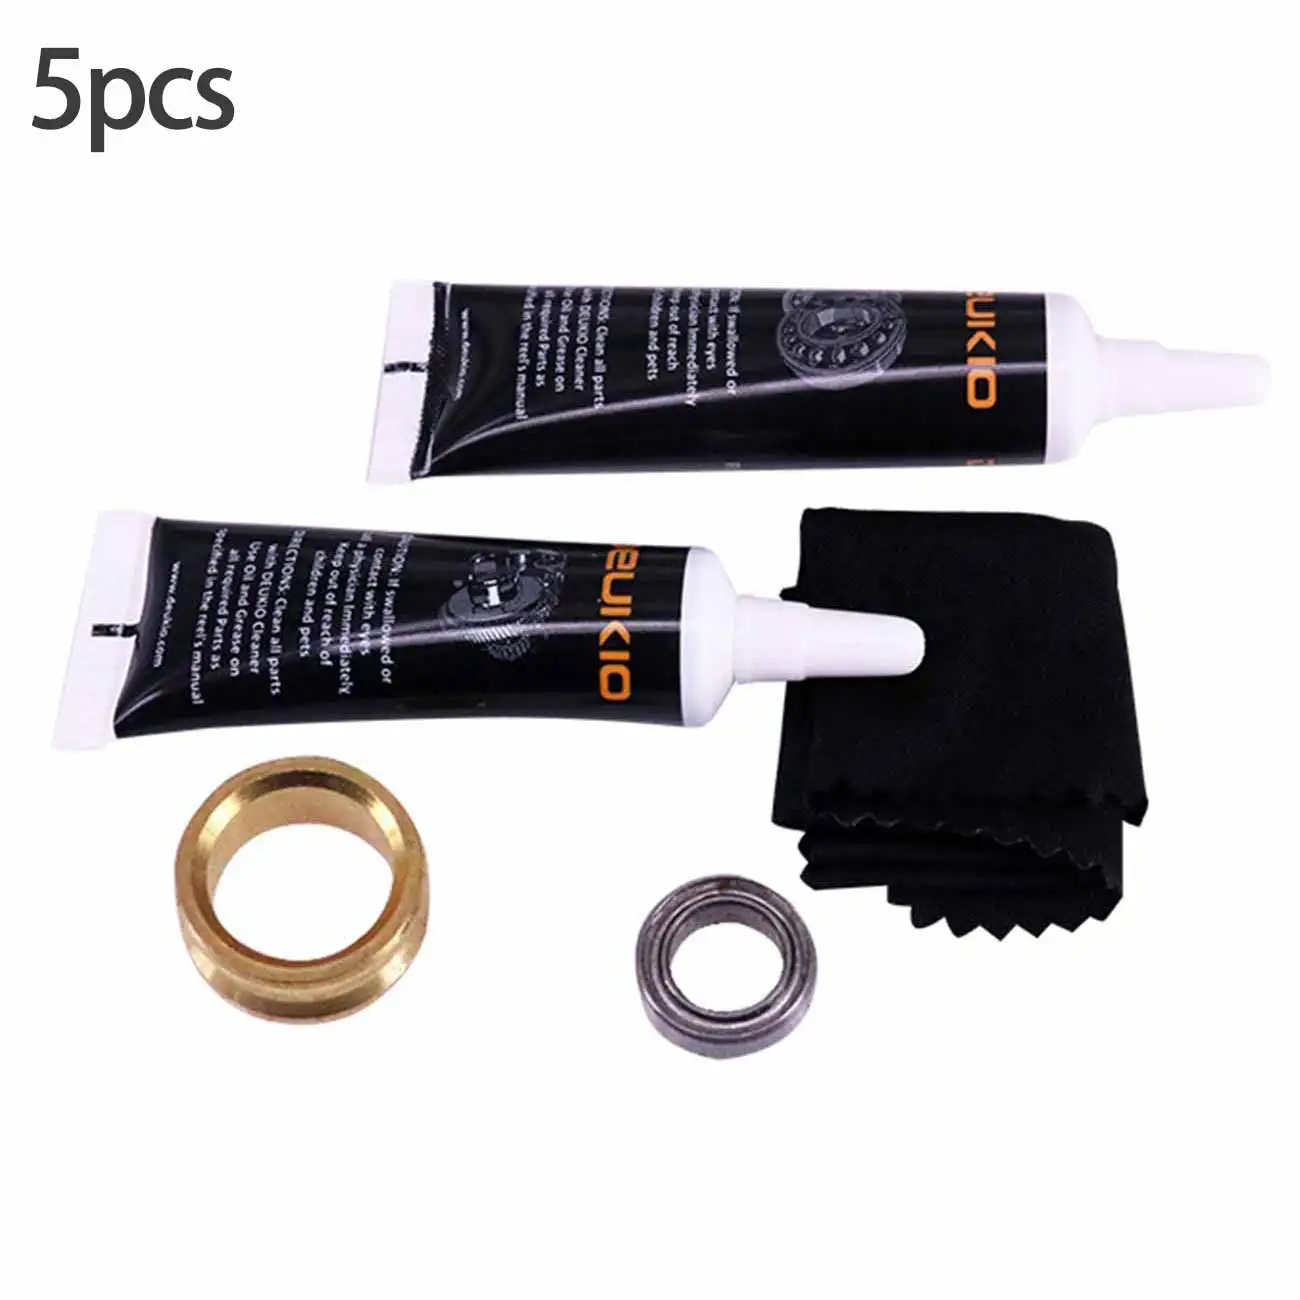 

5pcs Fishing Tool Maintenance Set Fishing Reel Lubricating Grease And Lubricant Oil Roller Bail Roller Bearing Lubricant